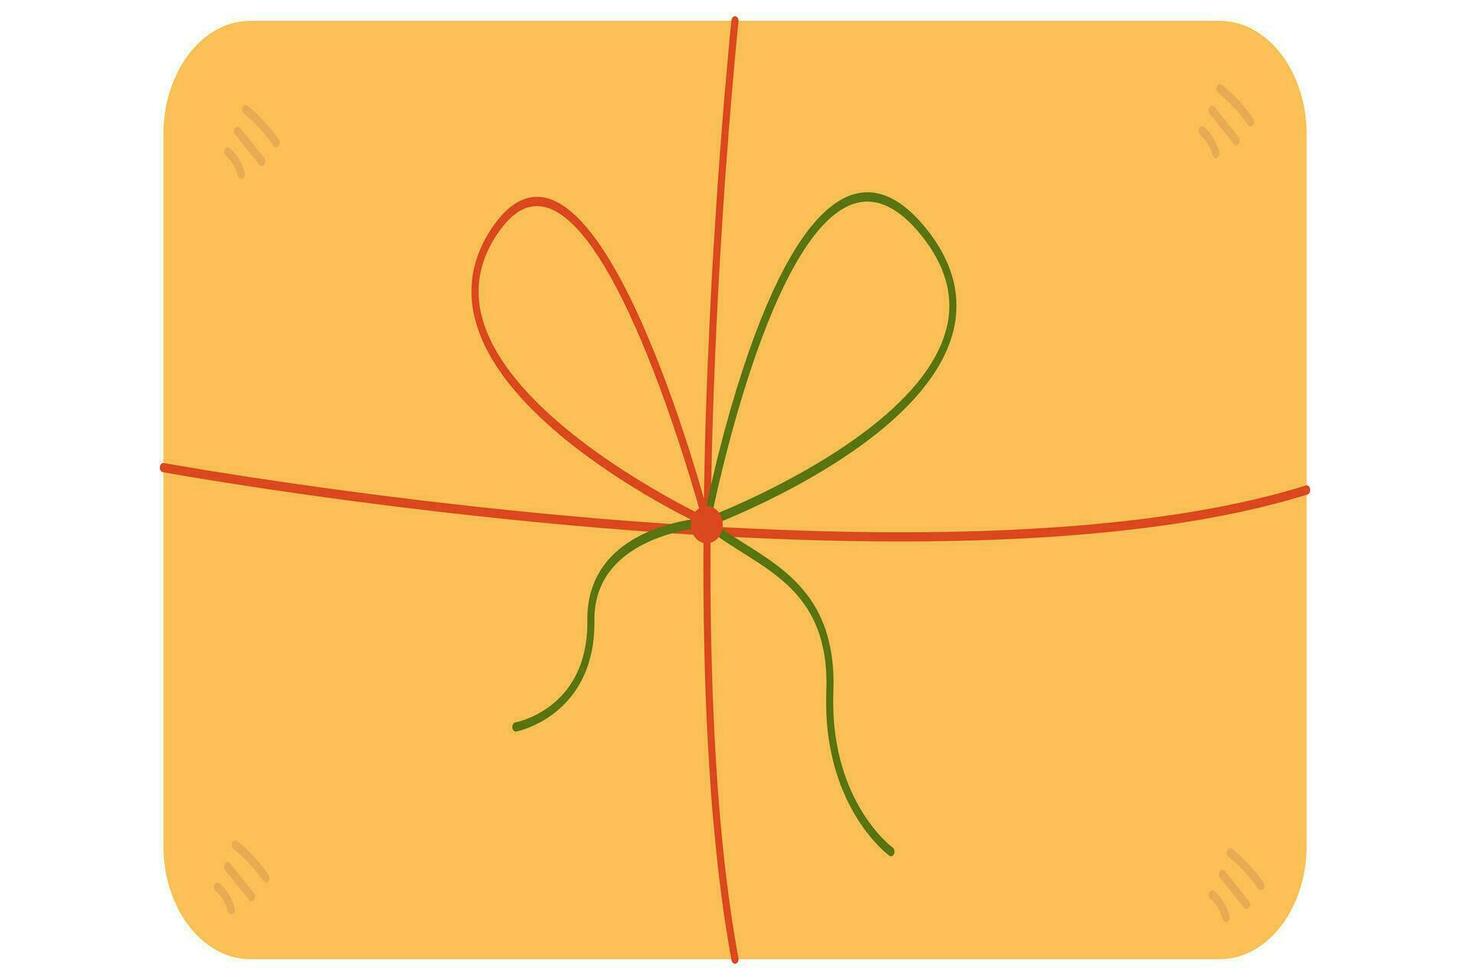 The yellow envelope is tied with a green and red ribbon vector